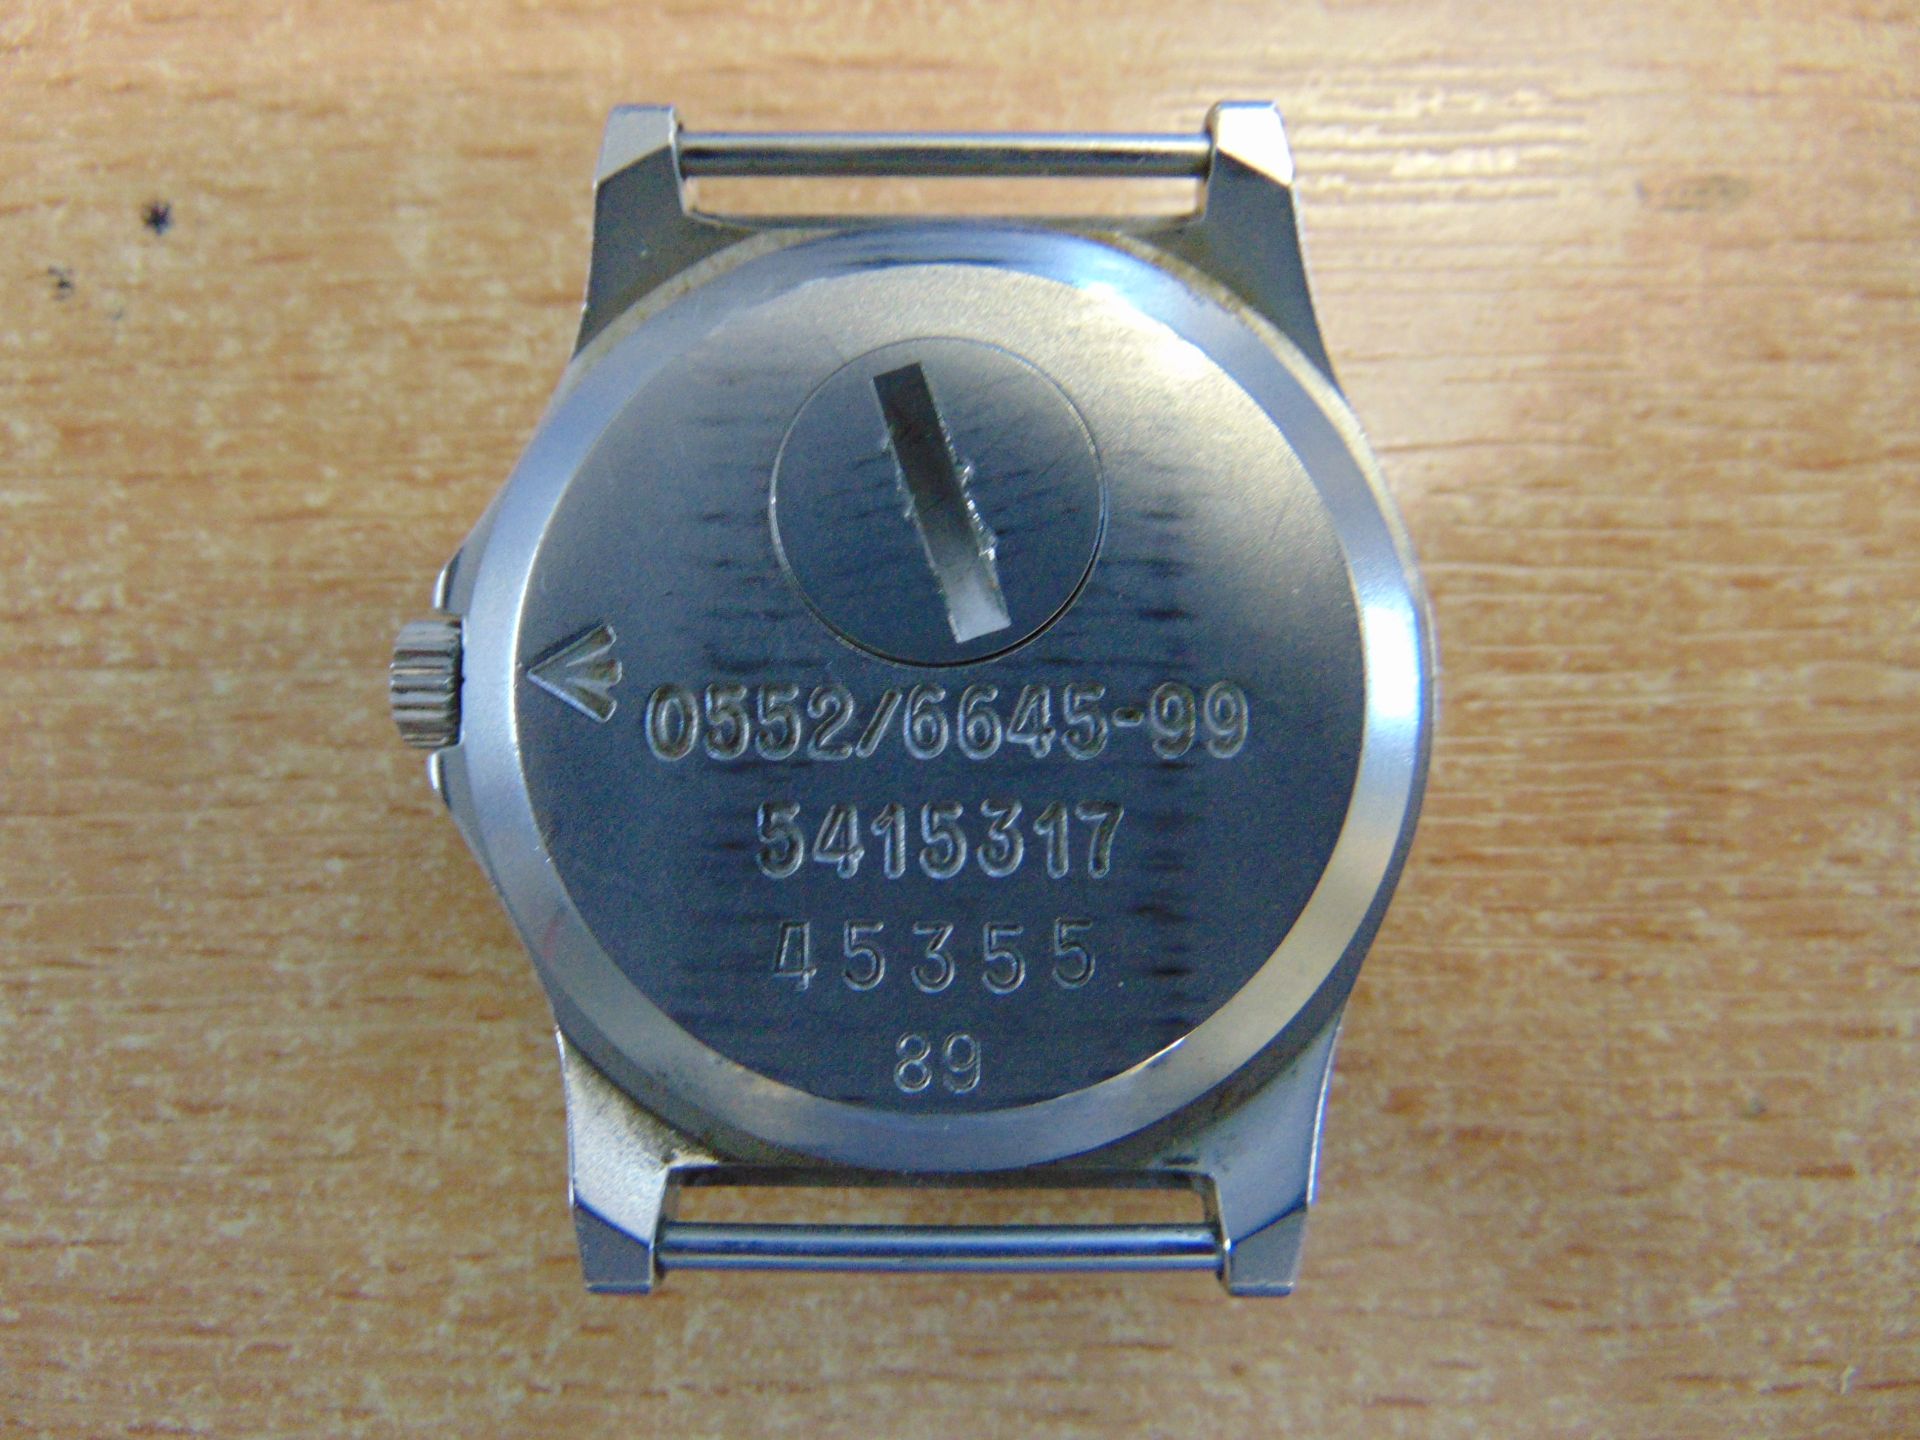 Rare CWC 0552 R.Marines/Navy Issue Service Watch Nato Marks Date 1989, New Battery/Strap - Image 3 of 5